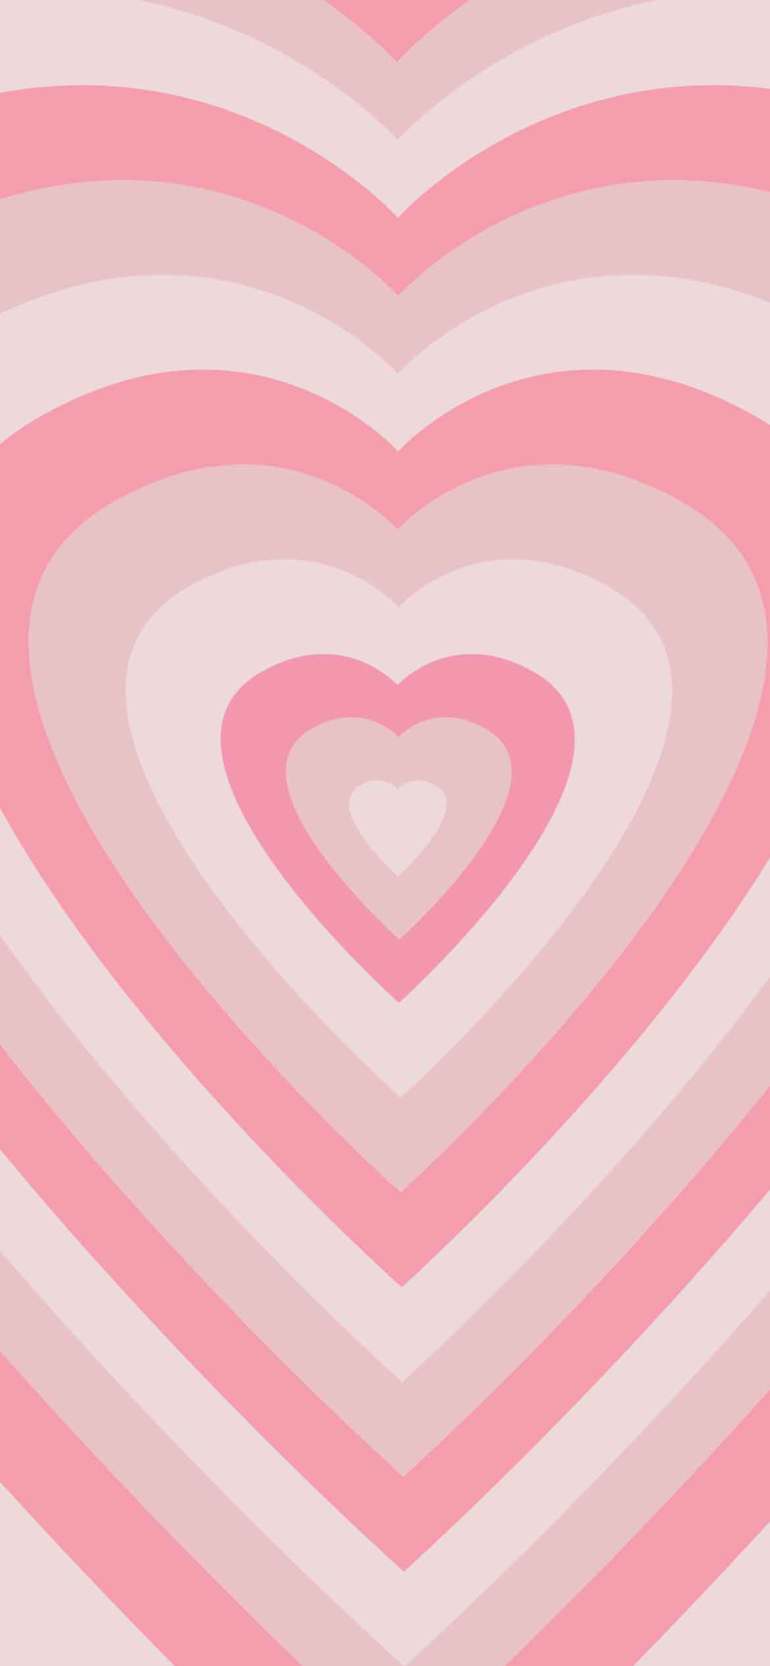 Pink Hintergrundbild 770x1666. Pink Aesthetic Picture : Layered Heart Shapes Wallpaper for Phone Wallpaper